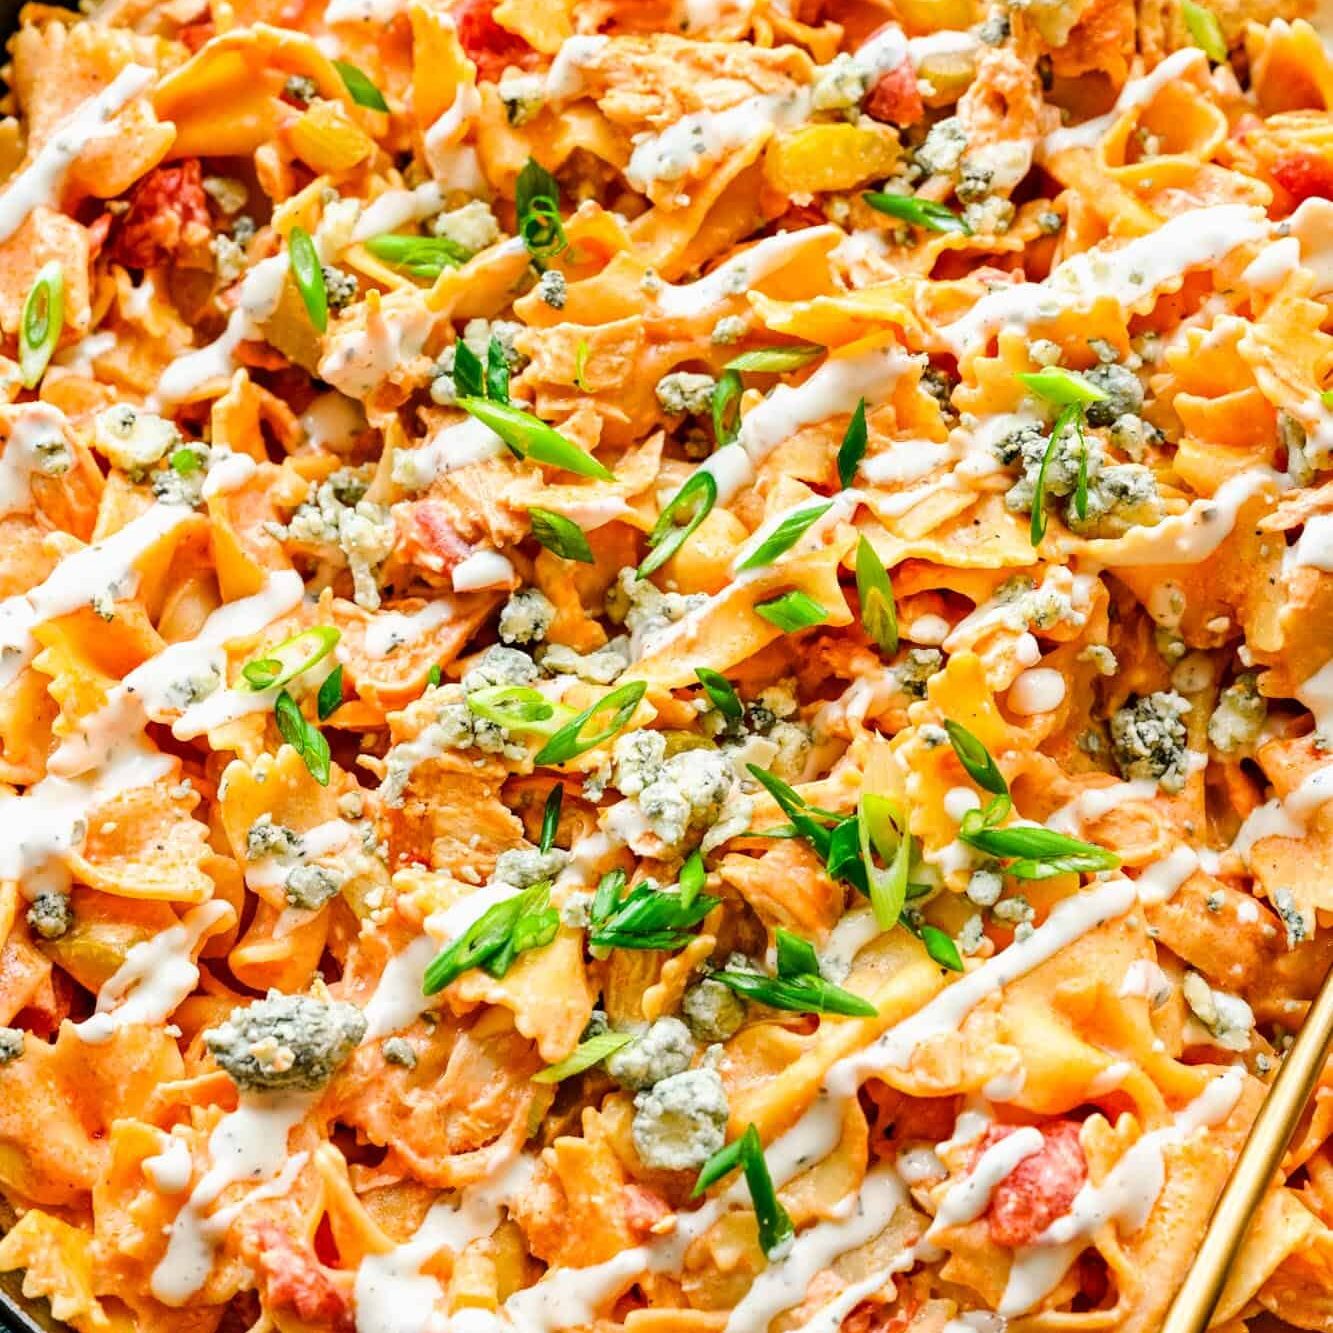 Close up of a skillet full of buffalo chicken pasta, drizzled with blue cheese dressing and garnished with cheese crumbles and green onions.